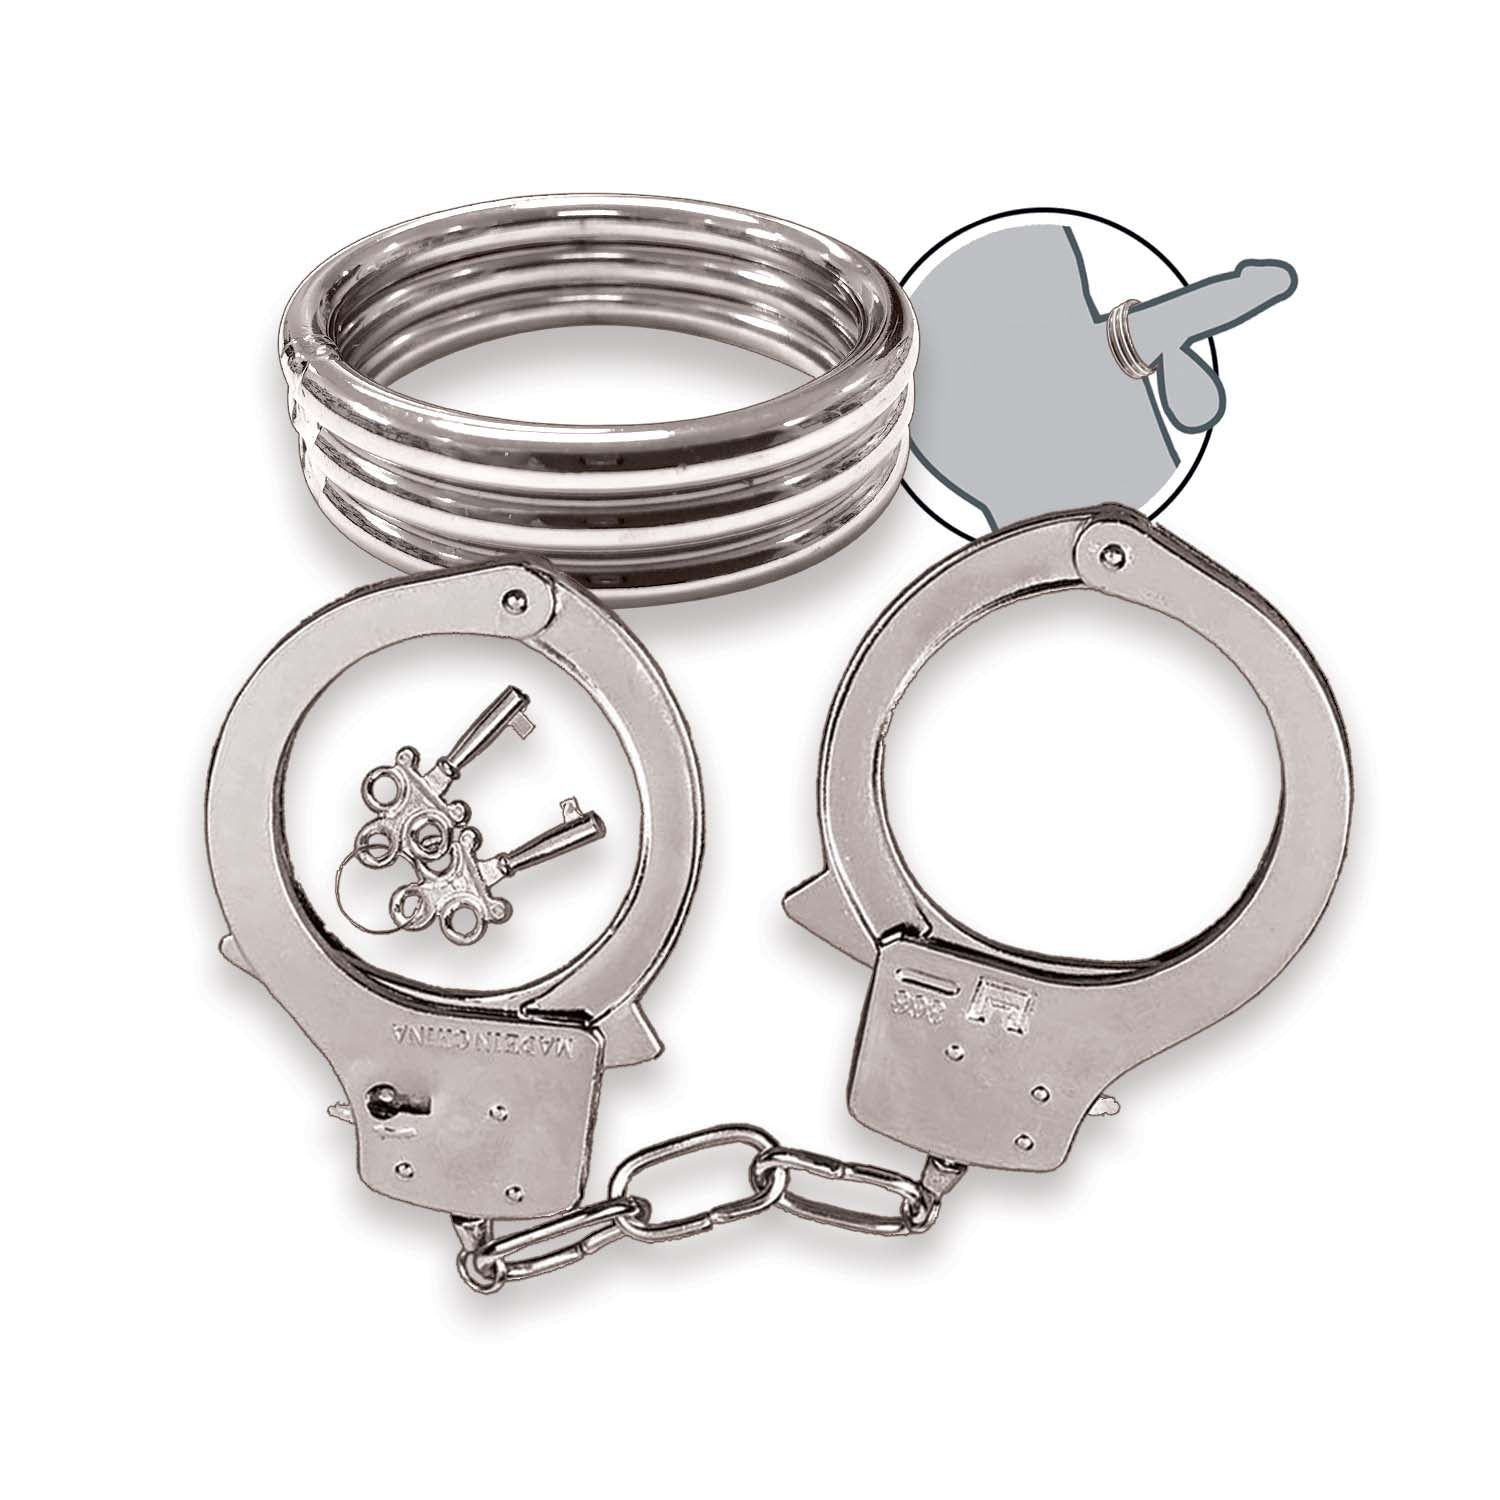 Dom/Sub Collection - Cuffs & Cock Ring *